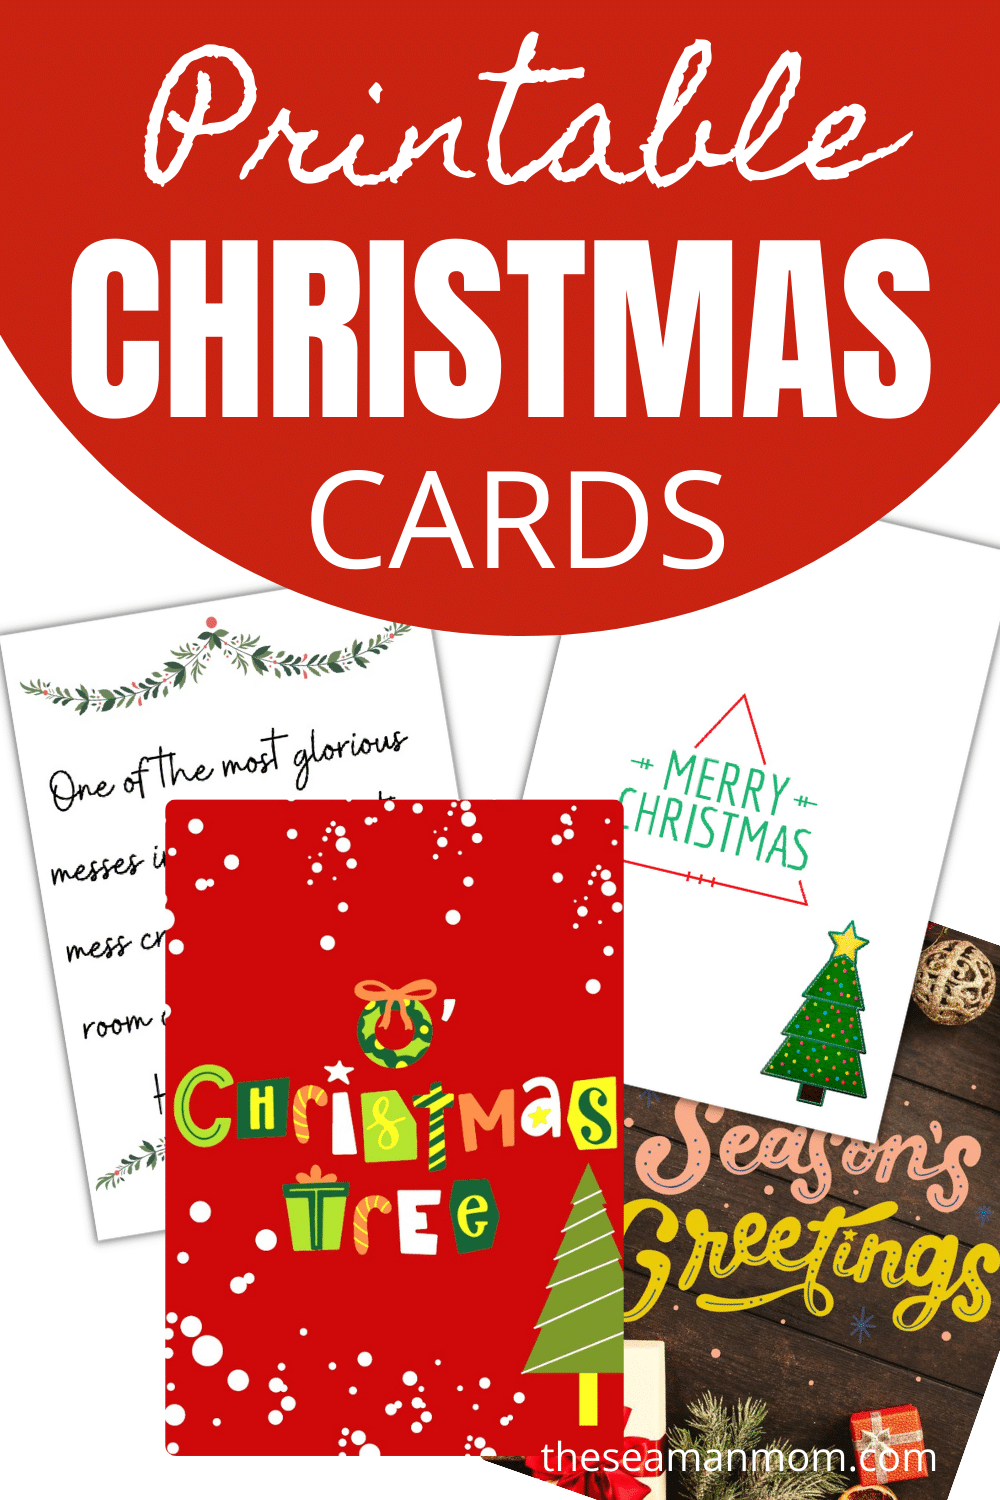 Easy Steps to Make Your Own Printable Christmas Cards at Home